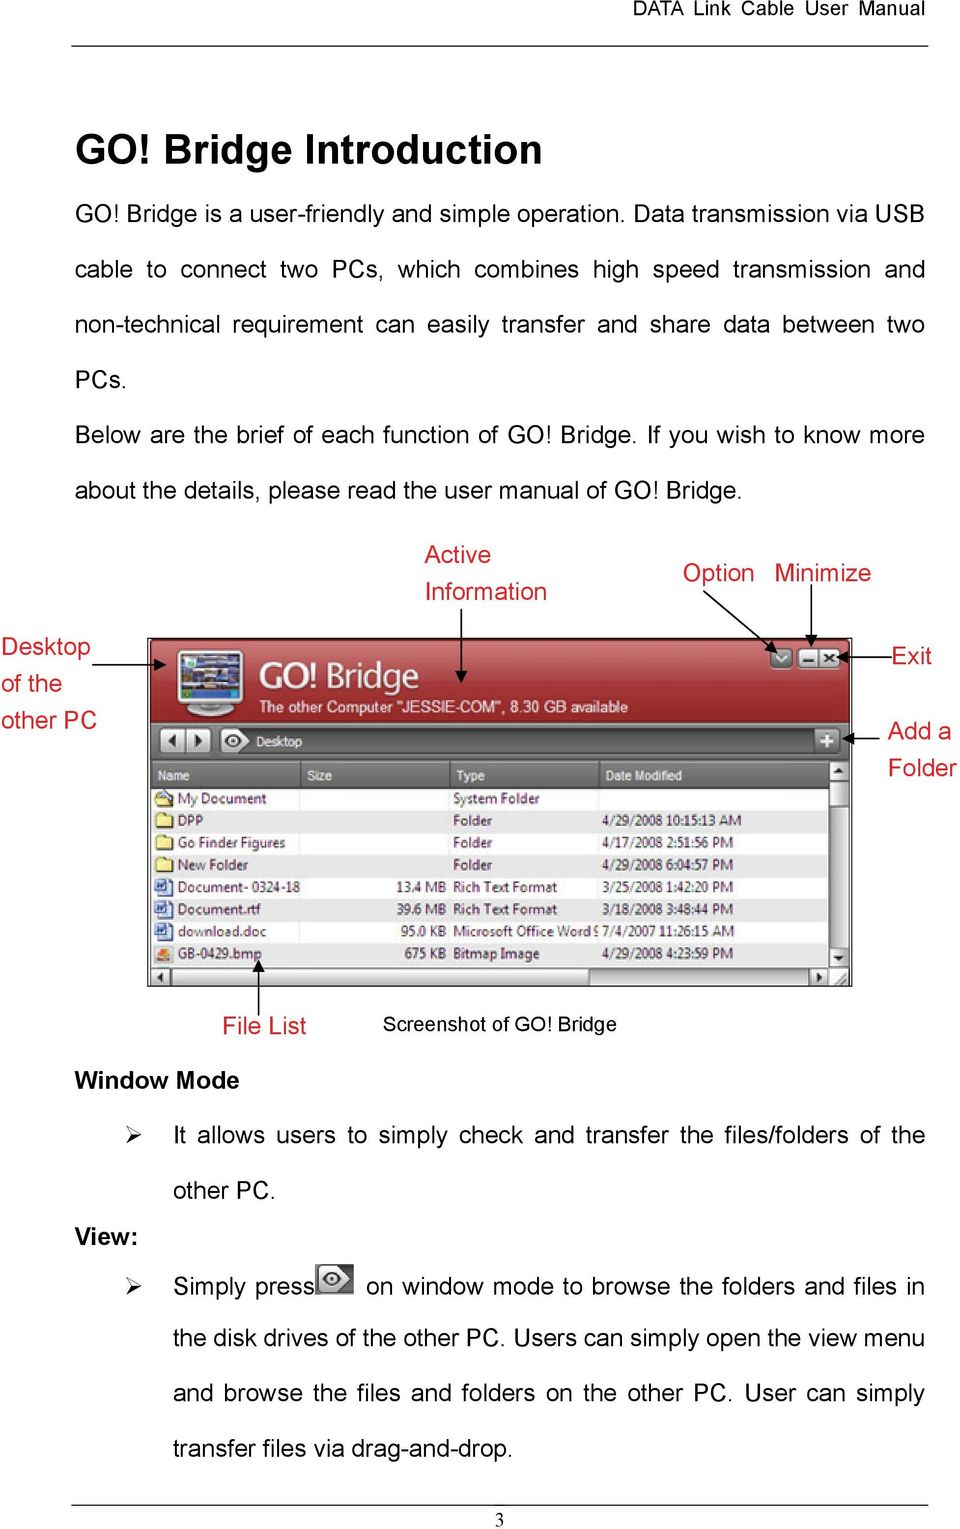 Below are the brief of each function of GO! Bridge. If you wish to know more about the details, please read the user manual of GO! Bridge. Active Information Option Minimize Desktop of the other PC Exit Add a Folder File List Screenshot of GO!